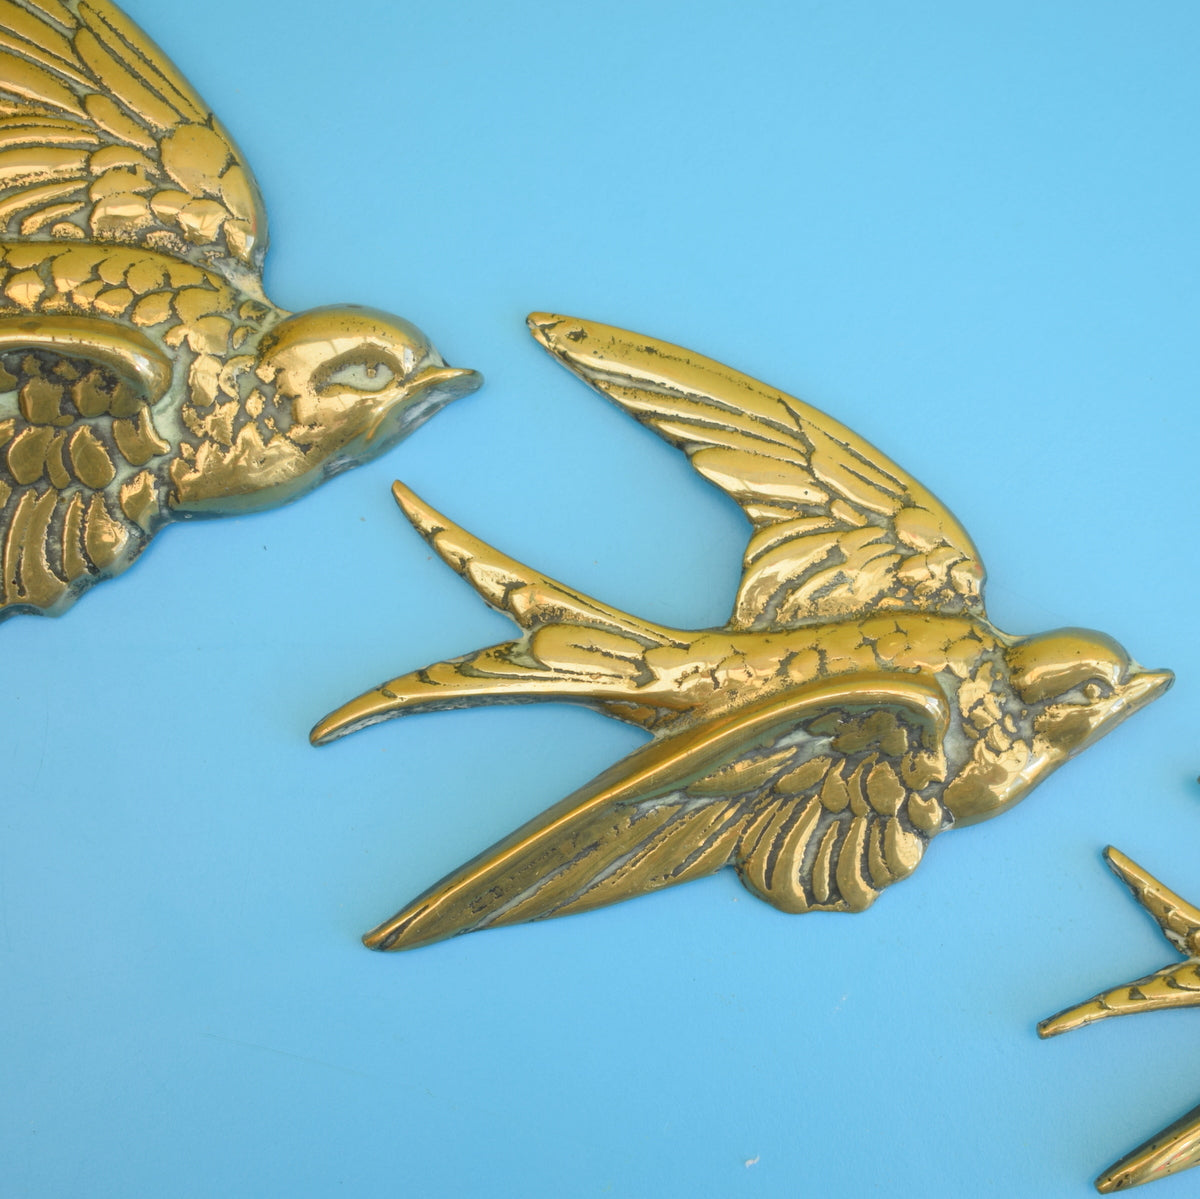 Vintage 1950s Brass Metal Flying Swallows - Wall Decor